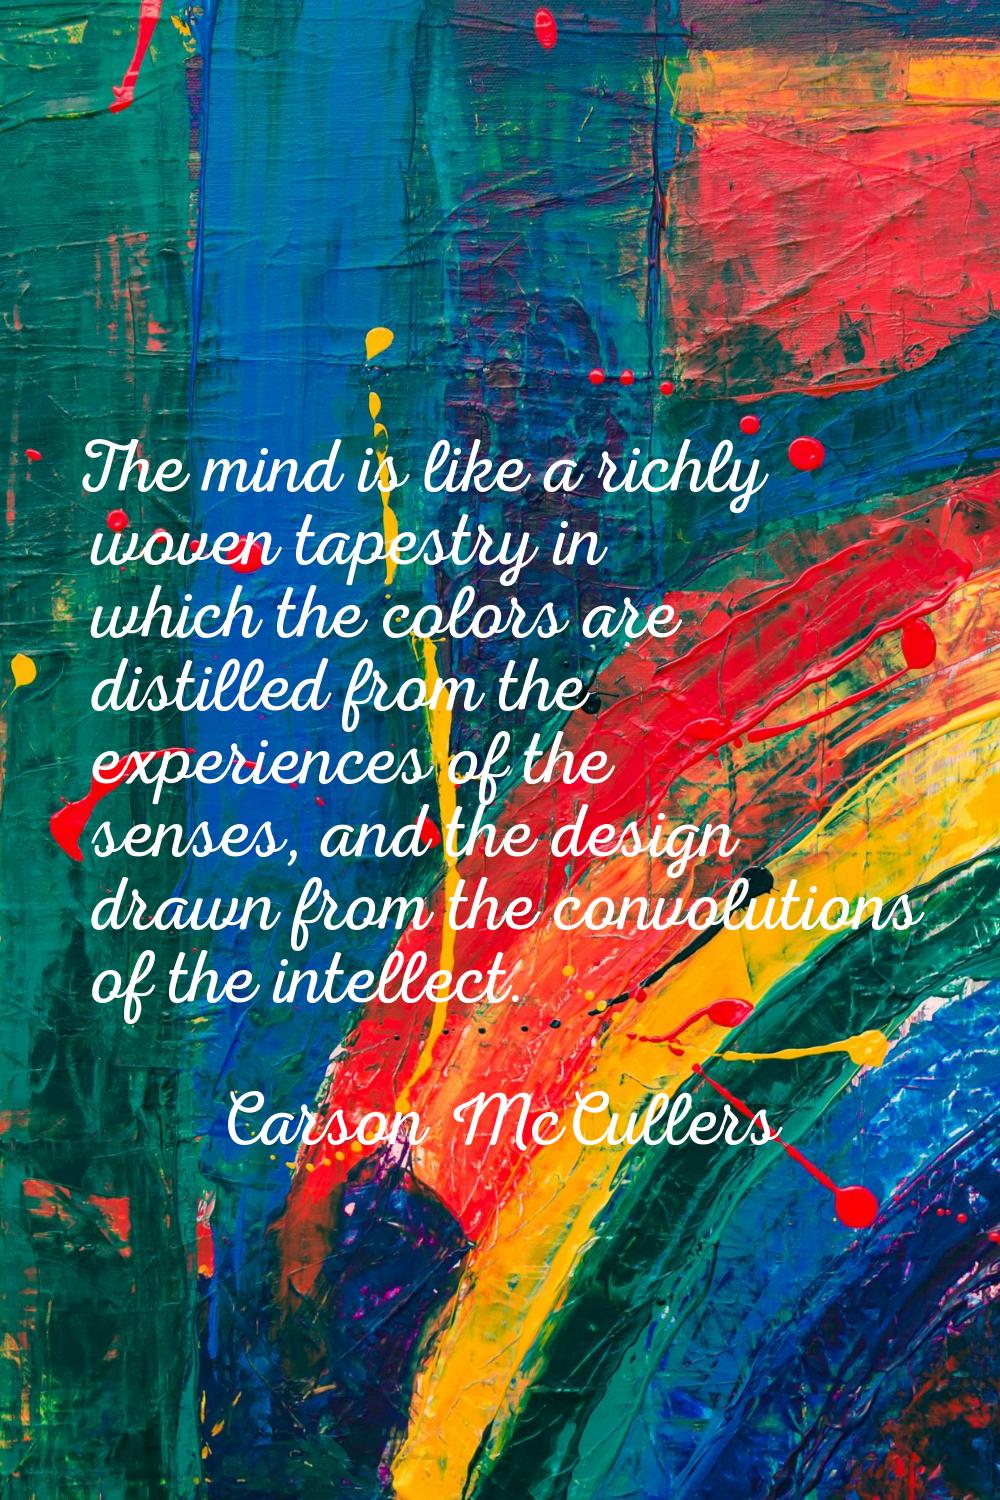 The mind is like a richly woven tapestry in which the colors are distilled from the experiences of 